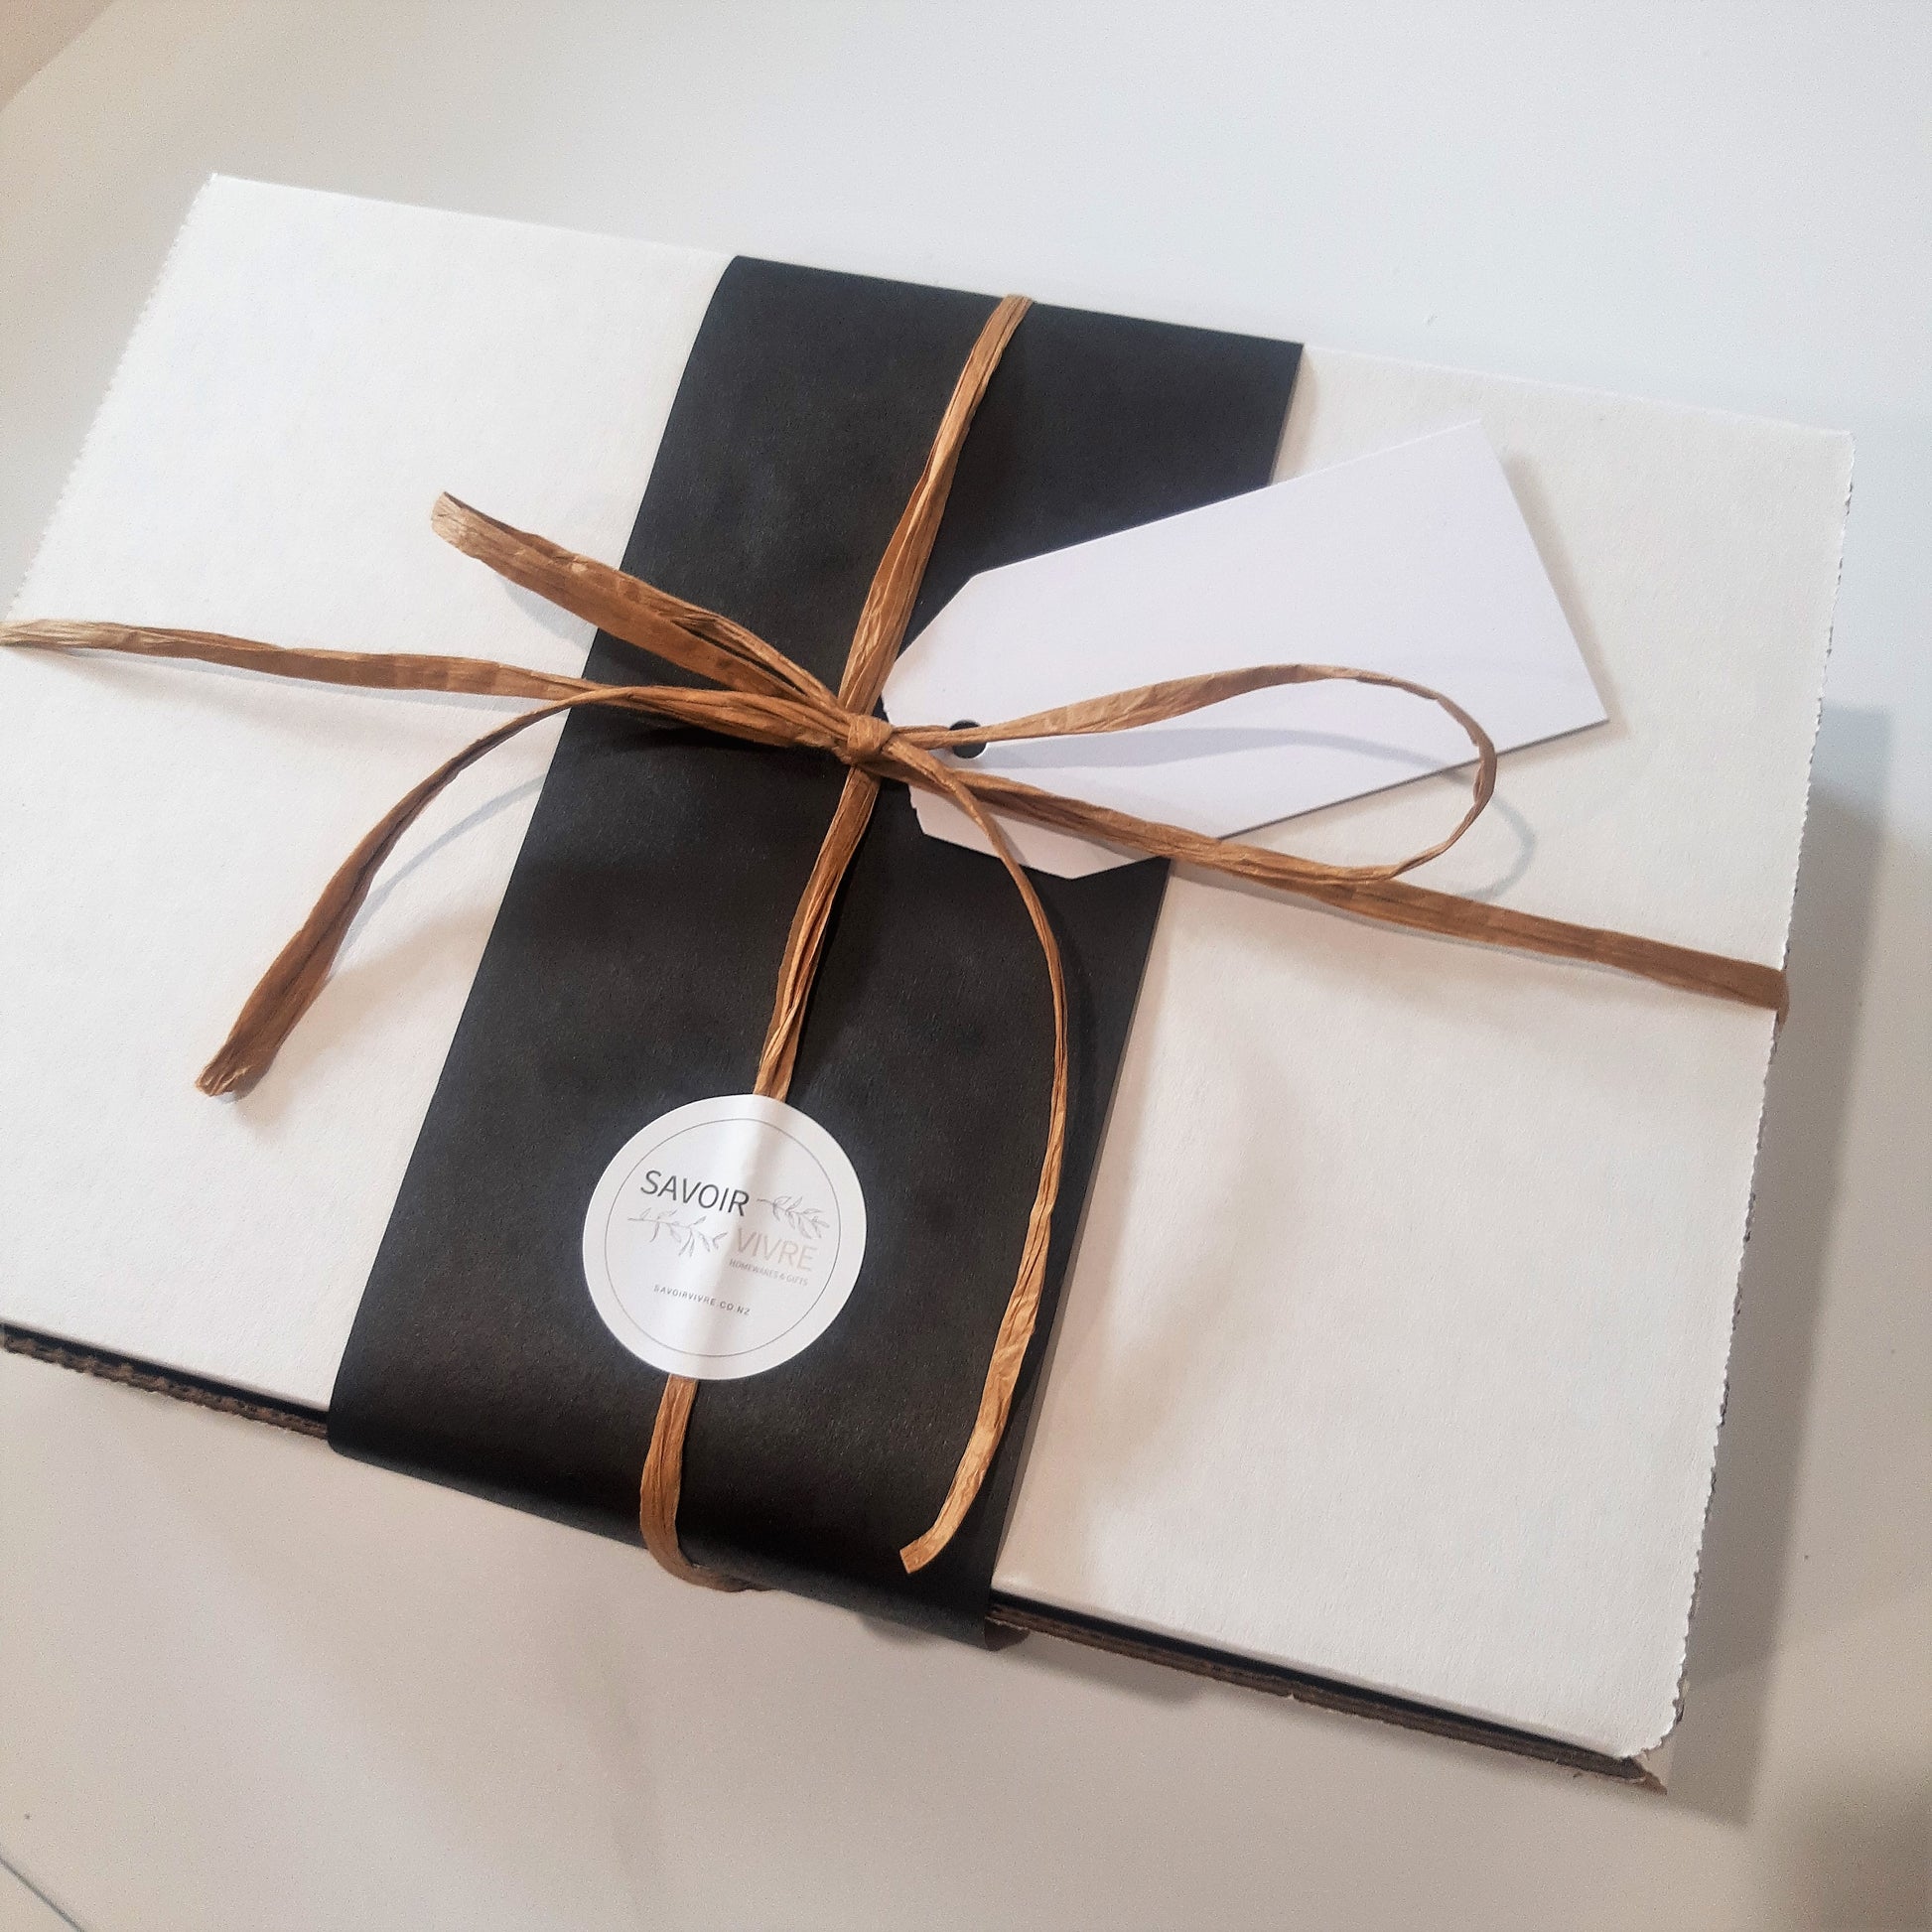 Men's Gift Box By Savoir Vivre Homewares and Gifts